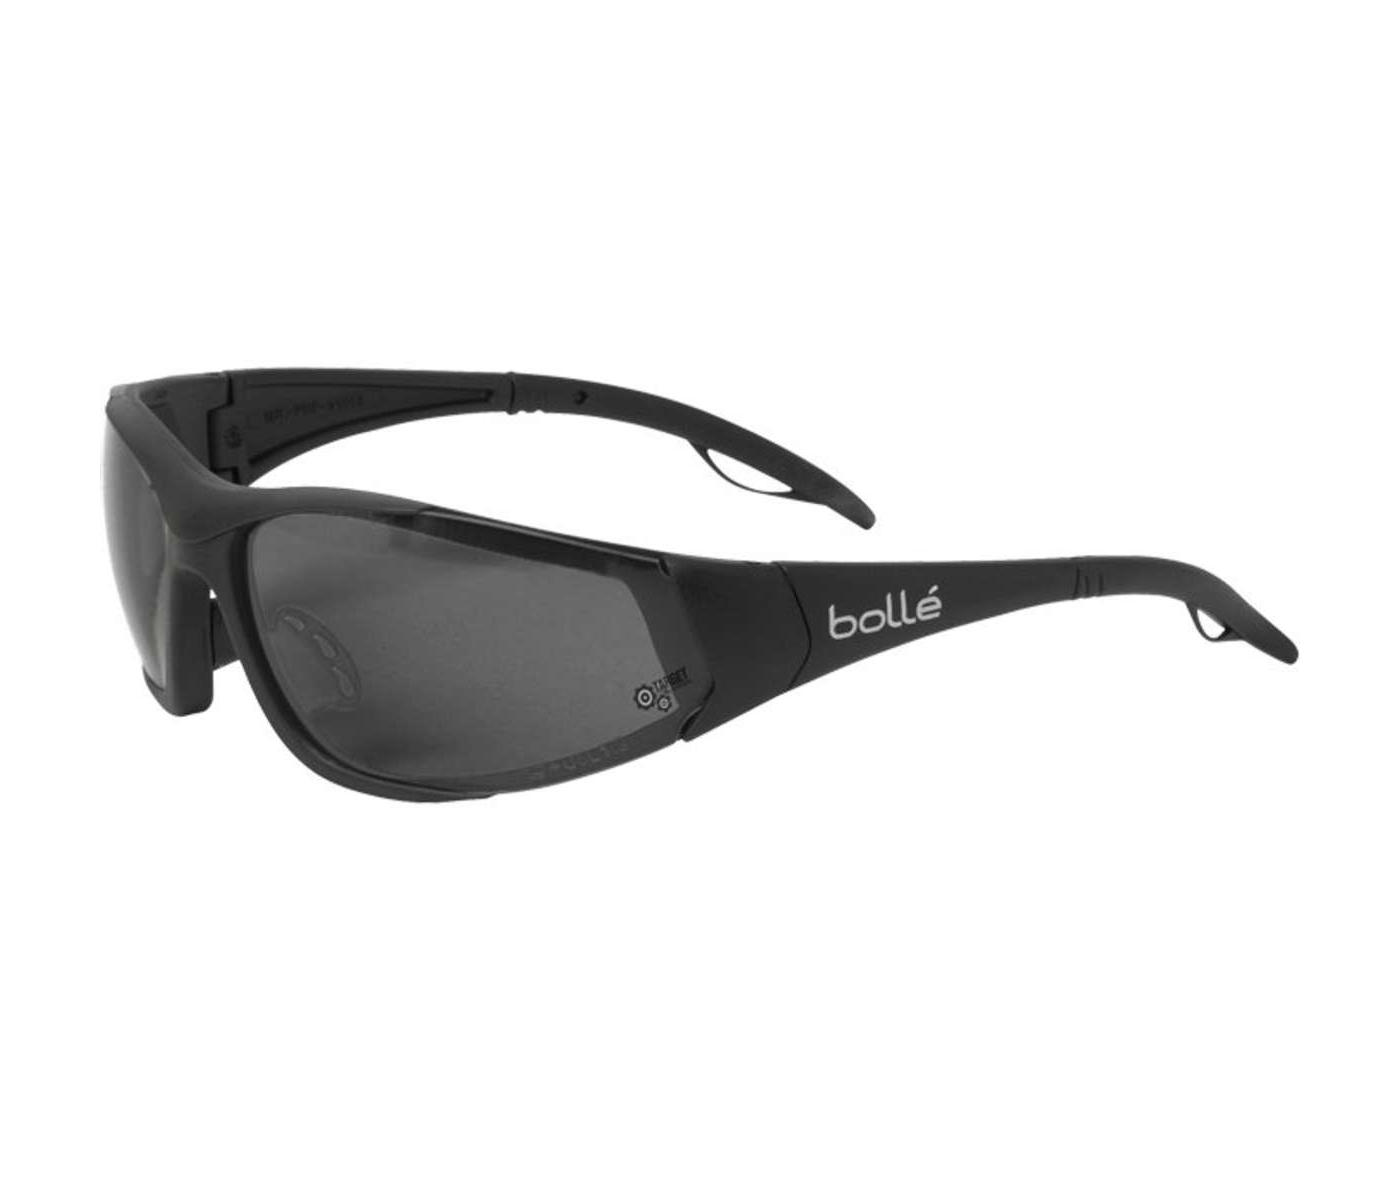 Bolle Rogue Safety Glasses - 3 Lens - Black